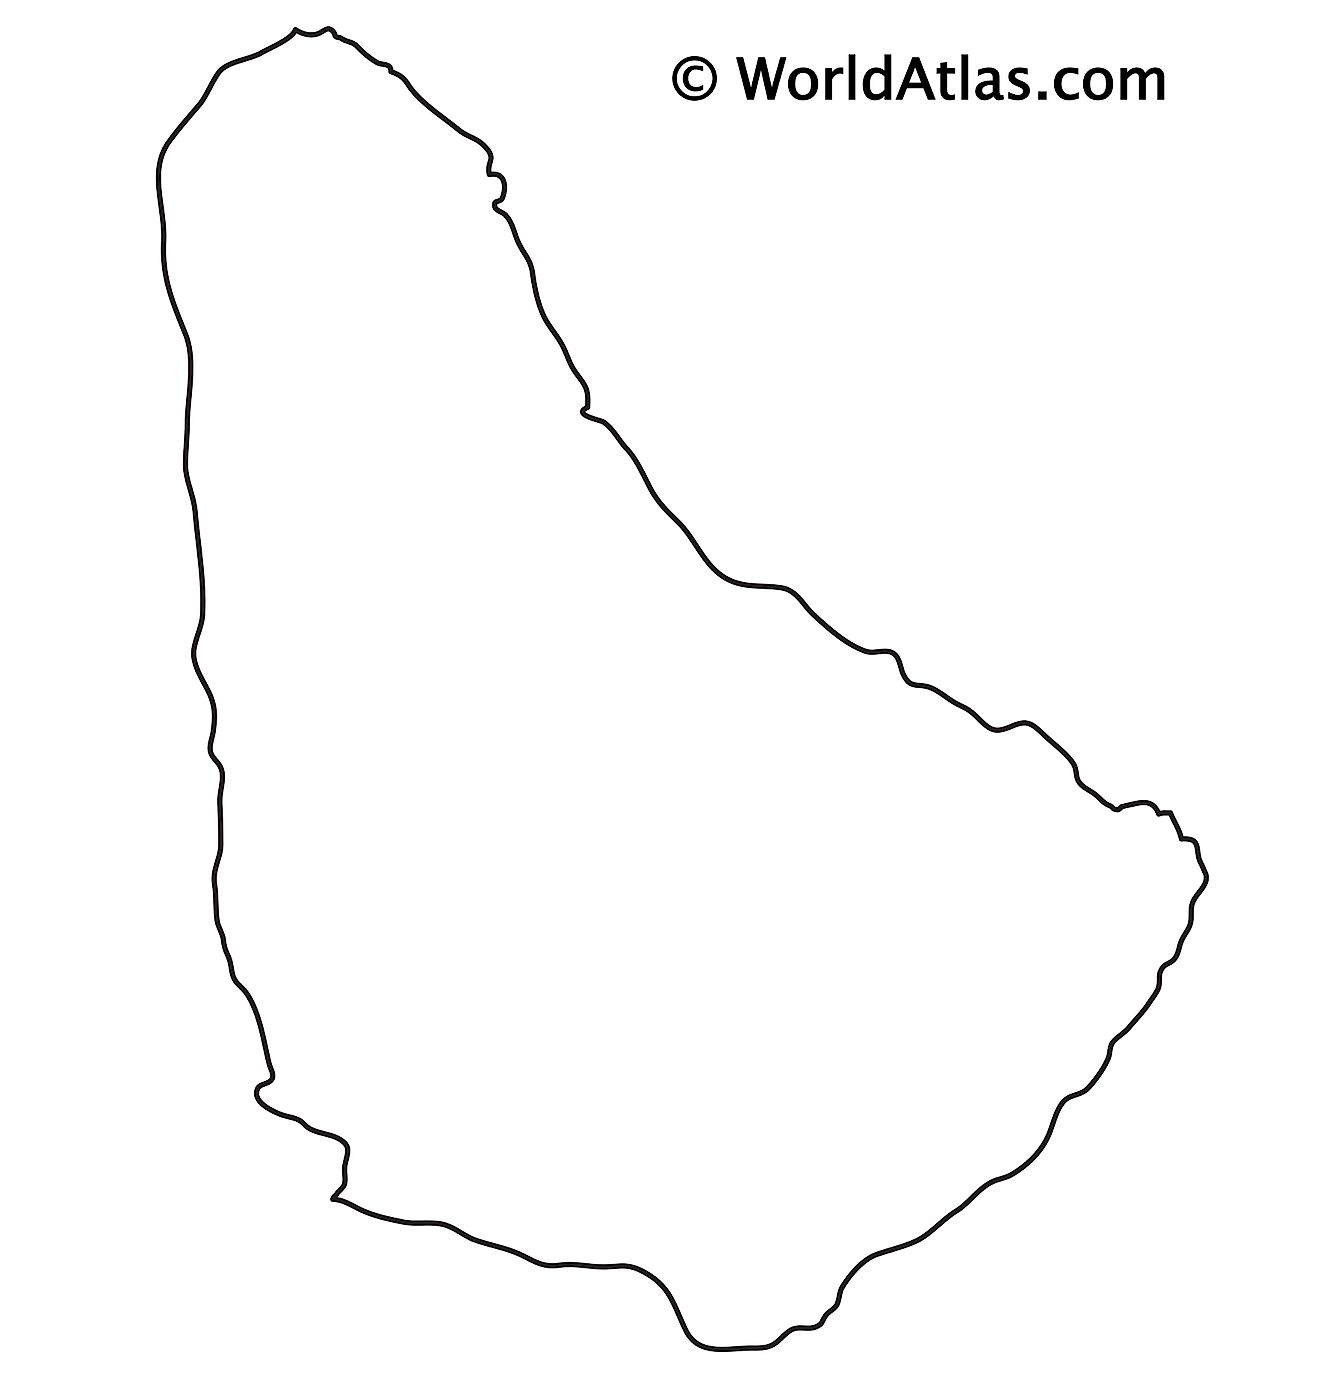 Blank outline map of Barbados